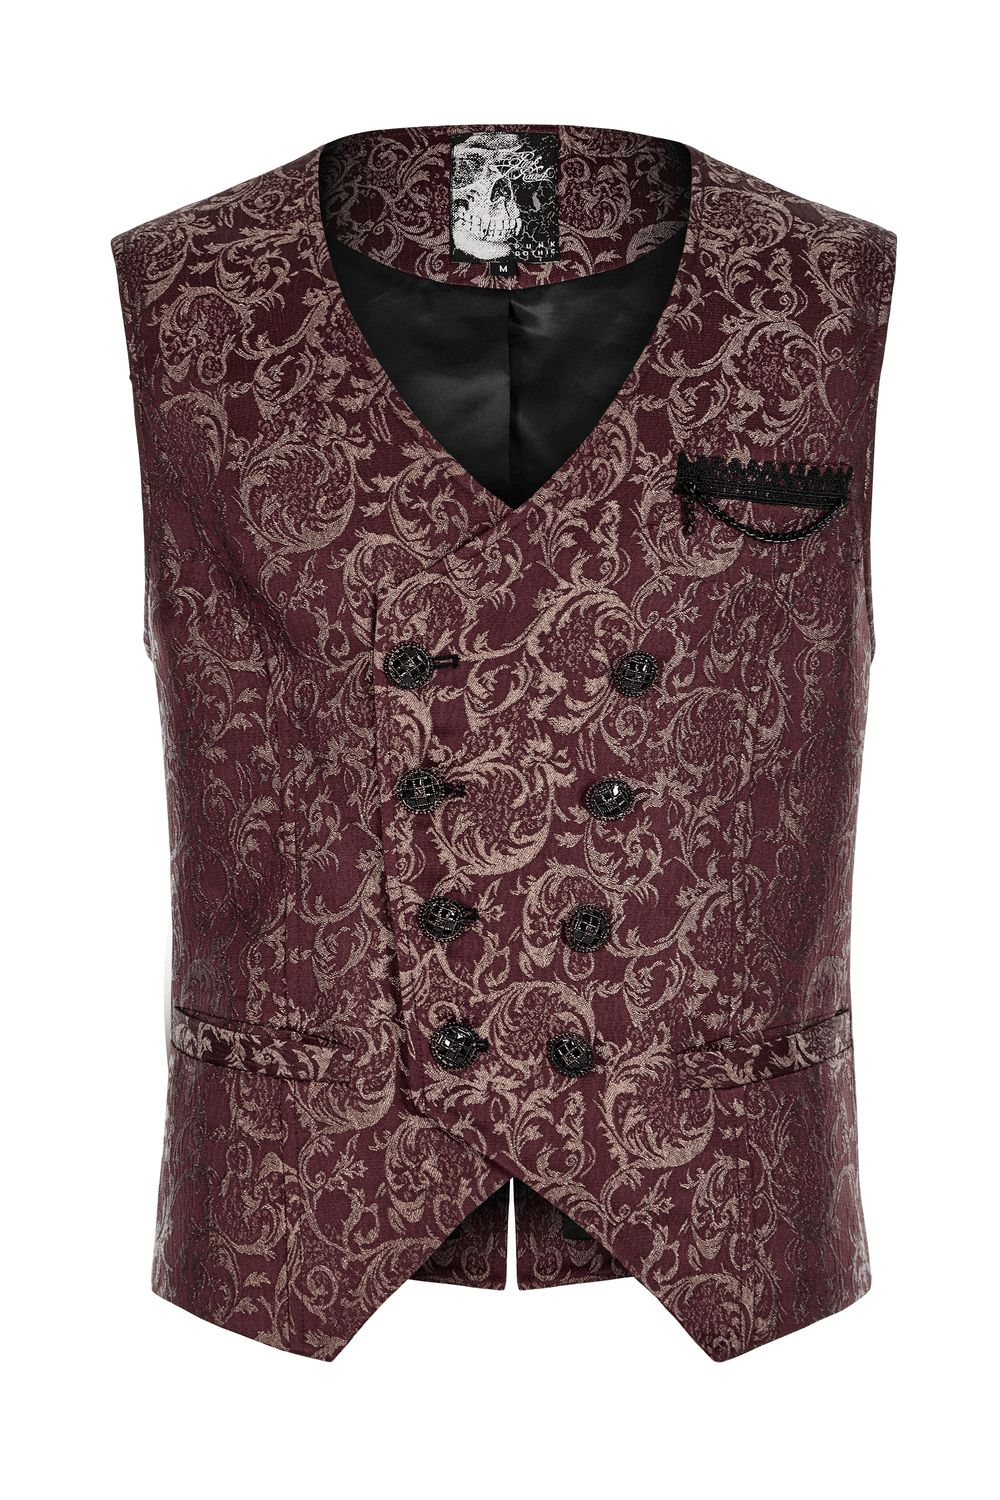 Victorian Elegance Jacquard Goth Waistcoat With Buttons - HARD'N'HEAVY